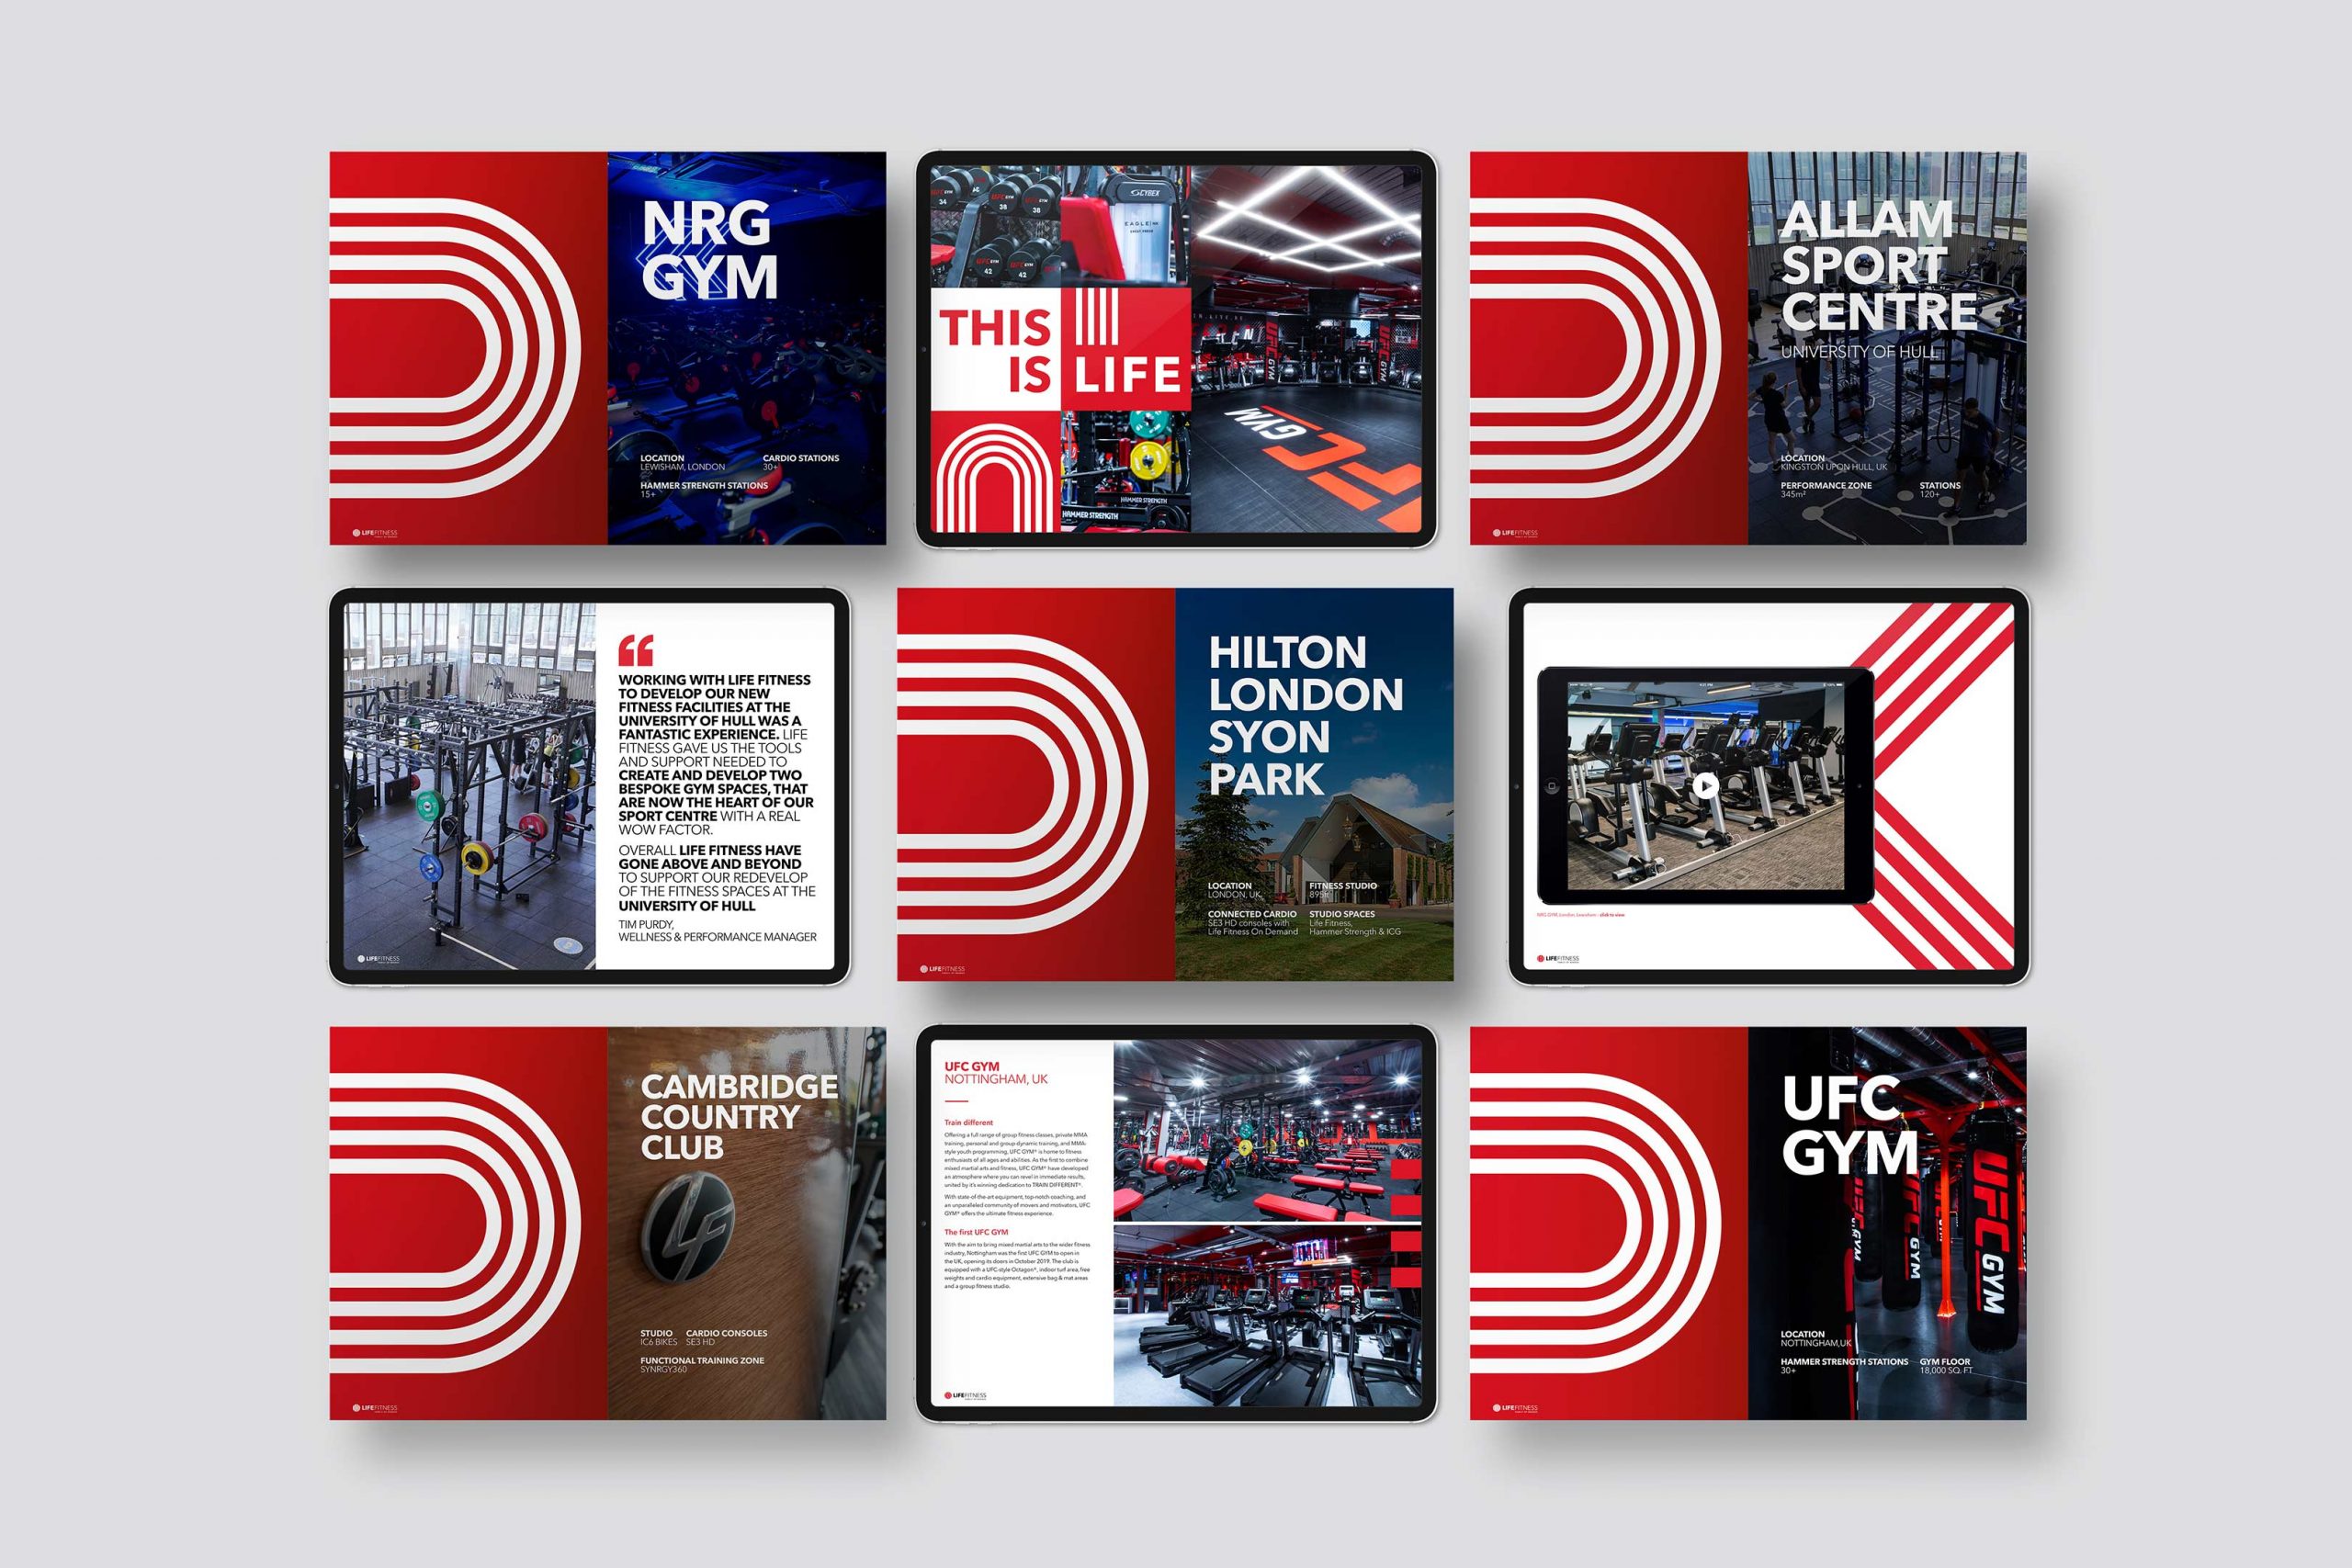 Creative, comms and strategic support for Life Fitness